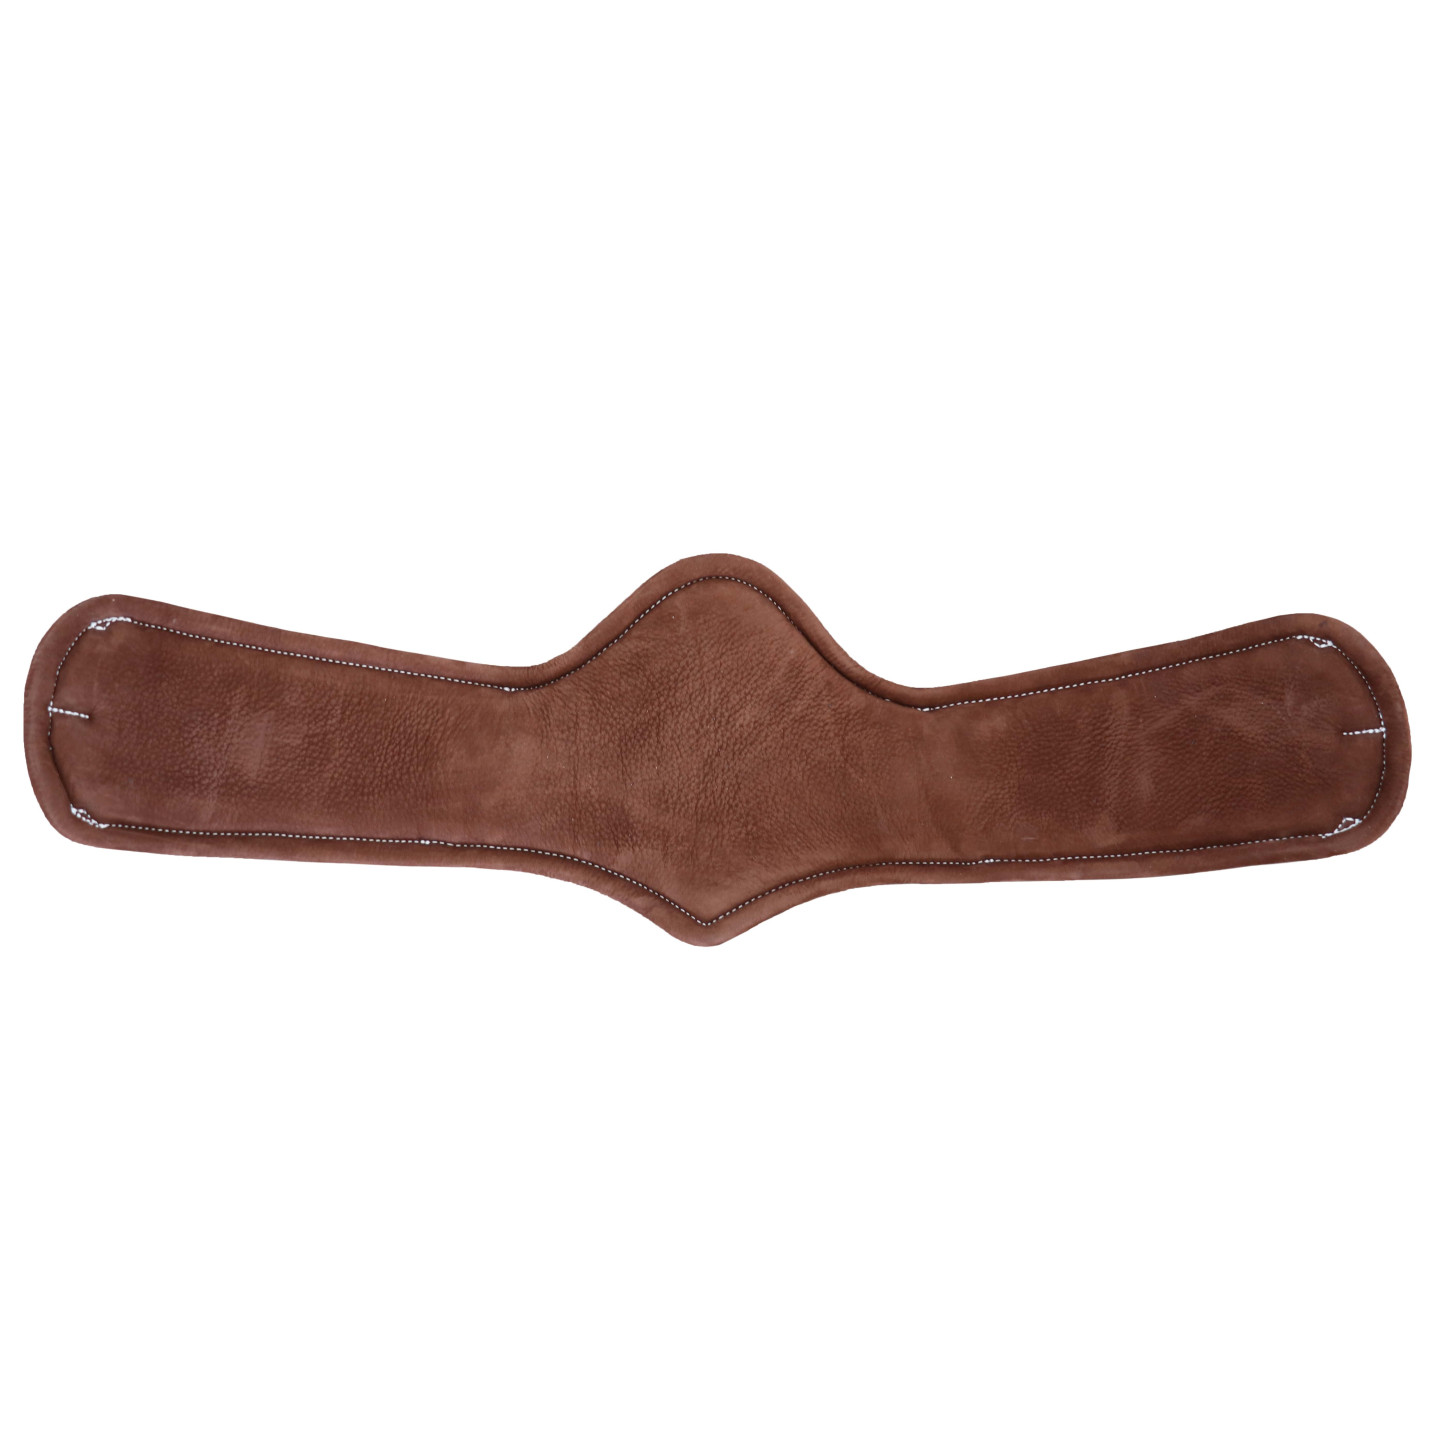 Voltaire Design Long Anatomic Girth in Chocolate - 48 NWOT